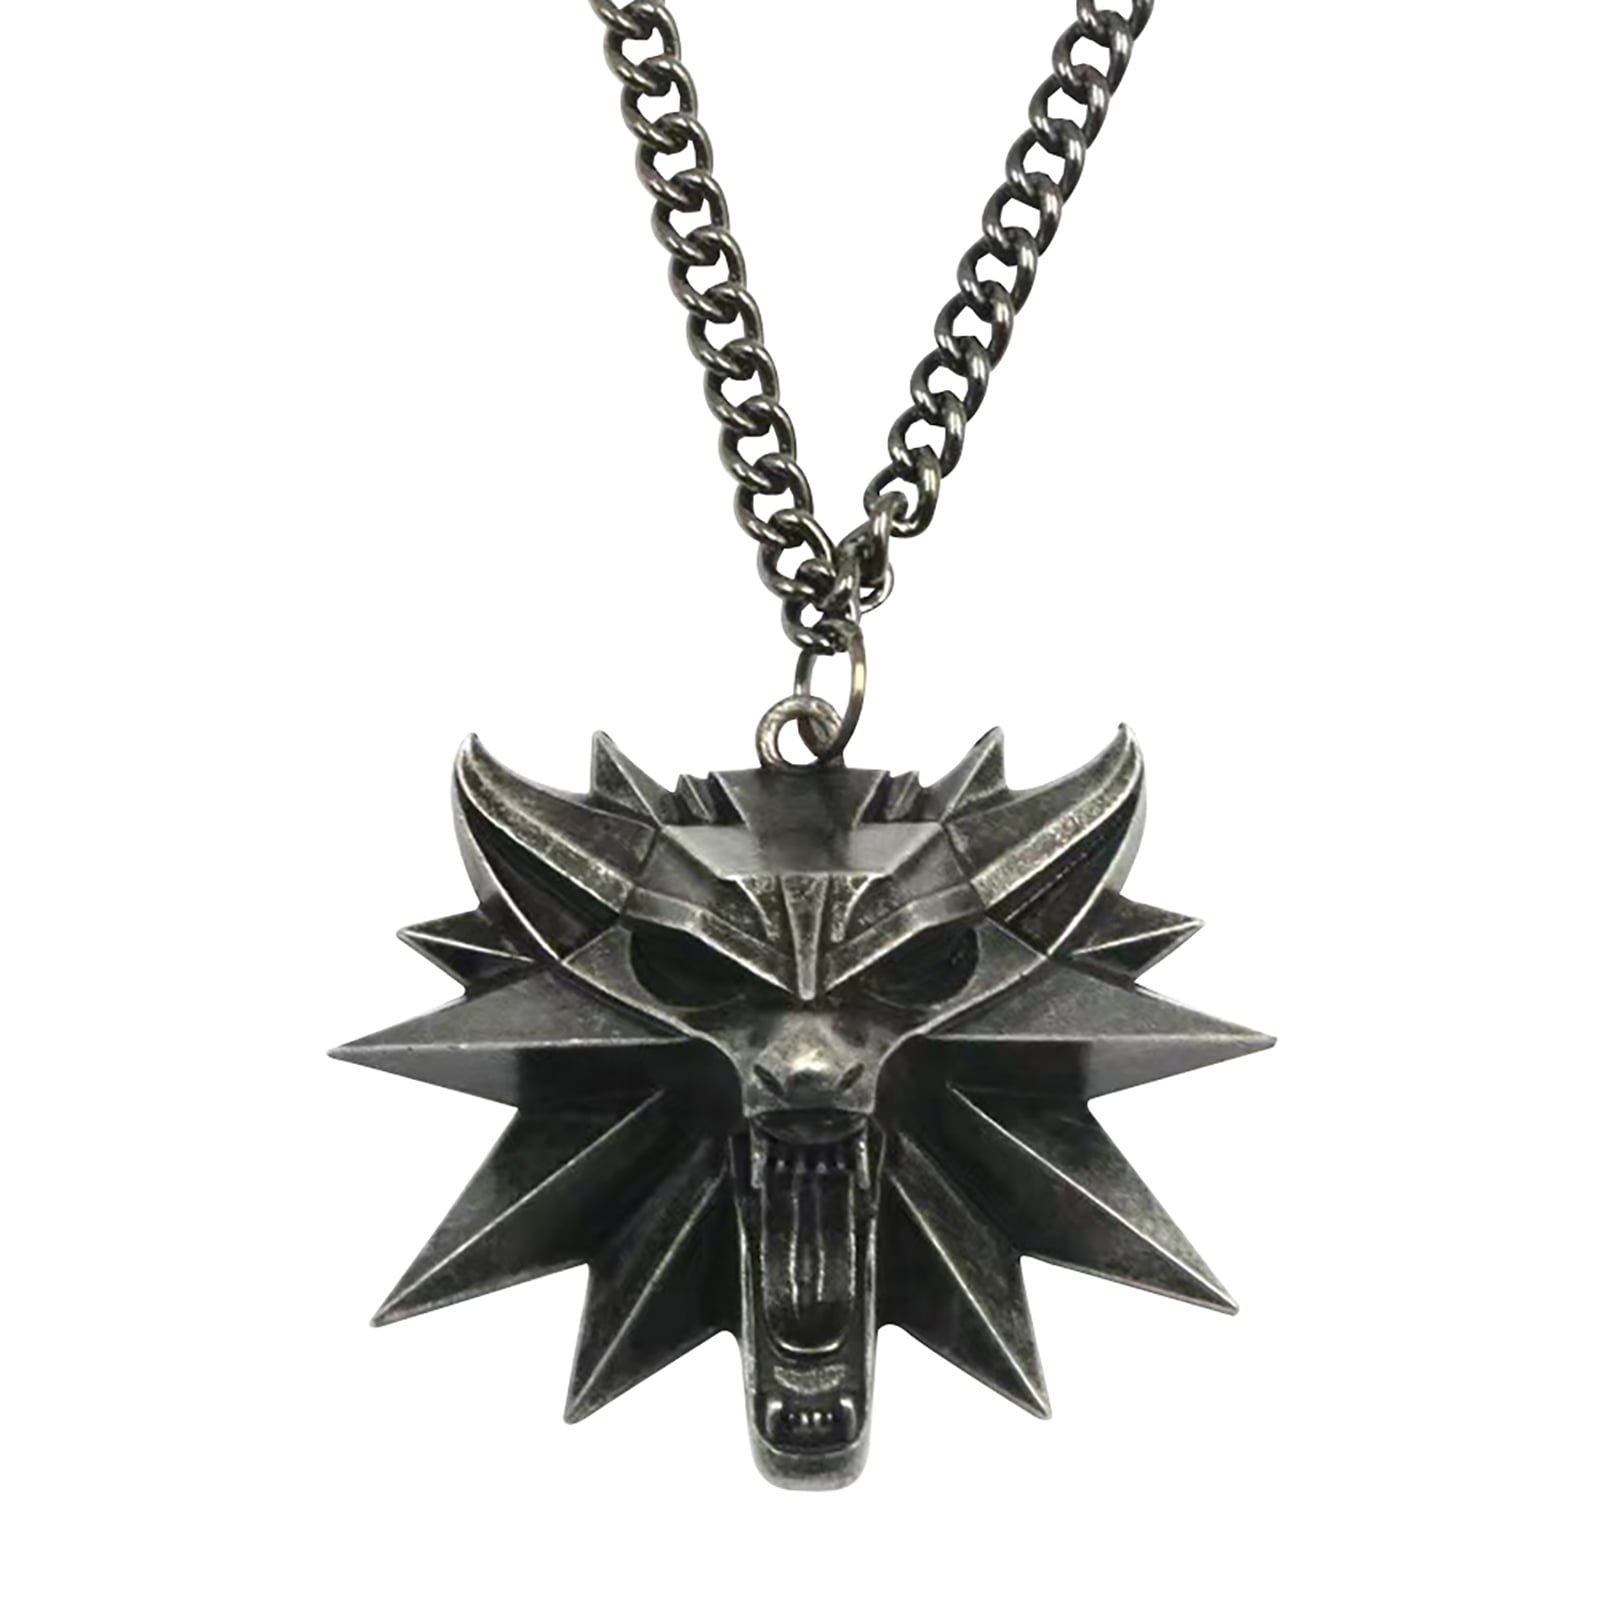 Game The Witcher3 Witcher Wolf Head Necklace Men's Necklace Pendant